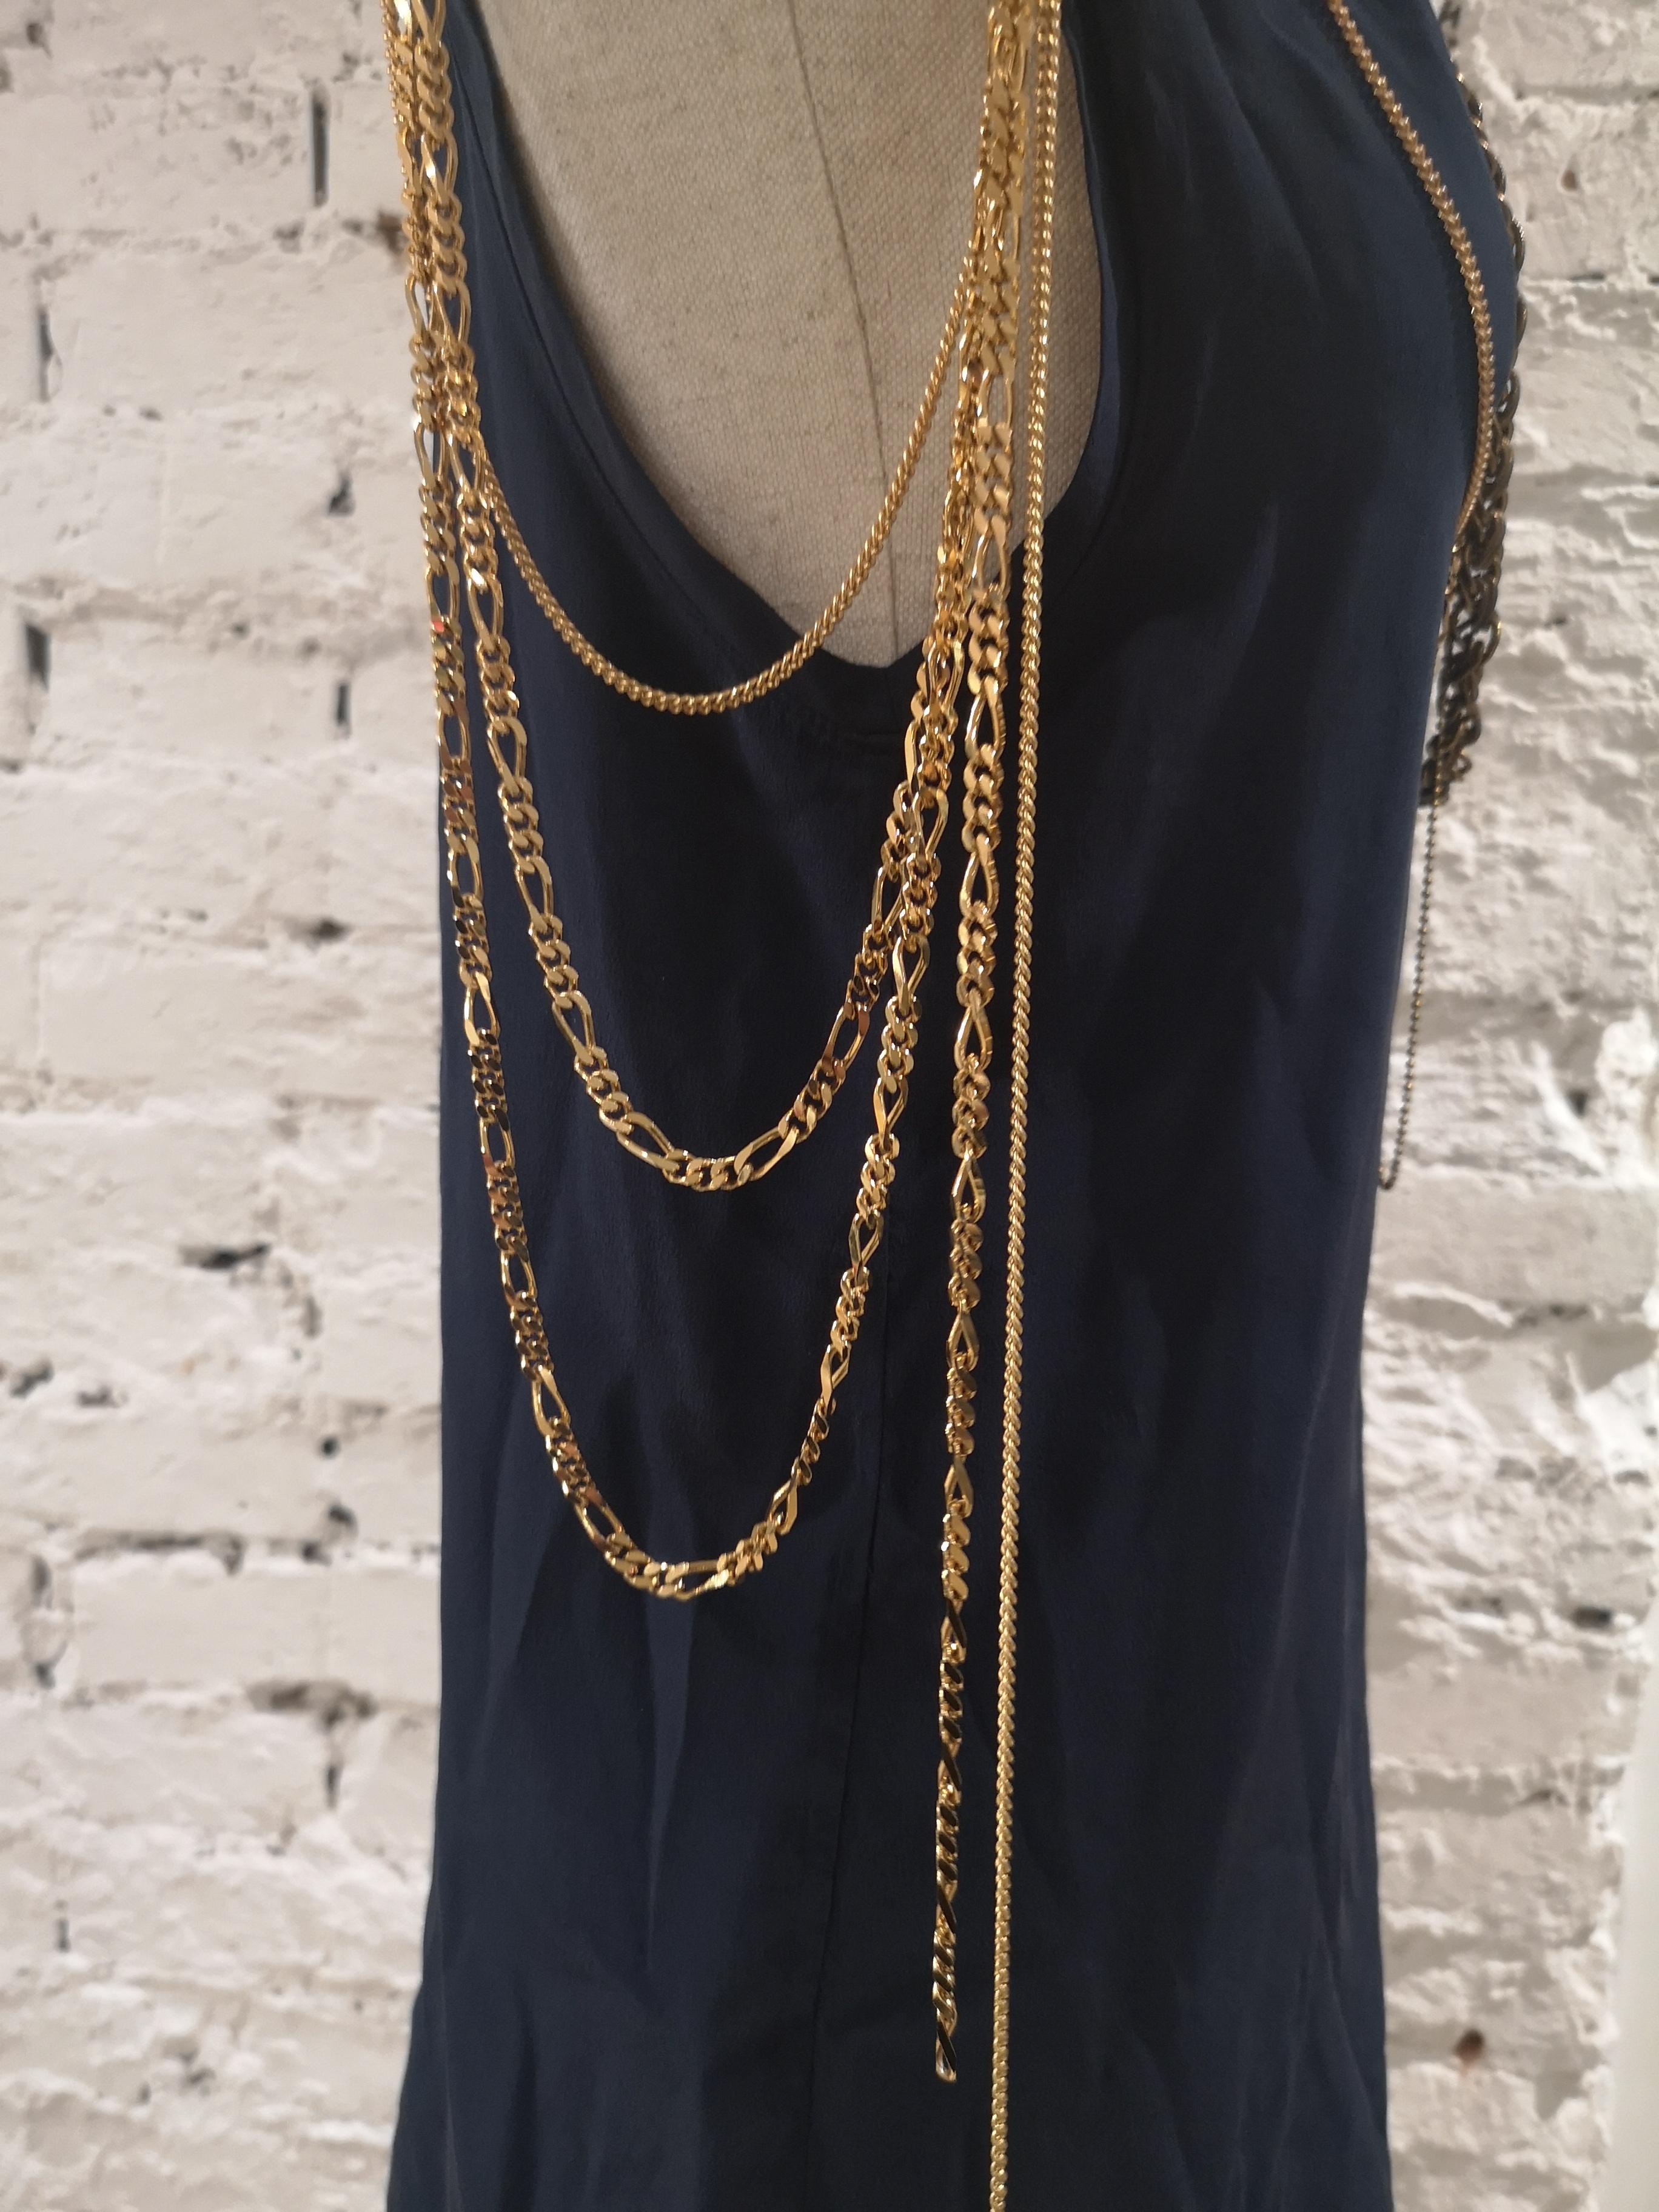 Black Balmain Navy Blue Sleeveless Top with Gold Chains For Sale